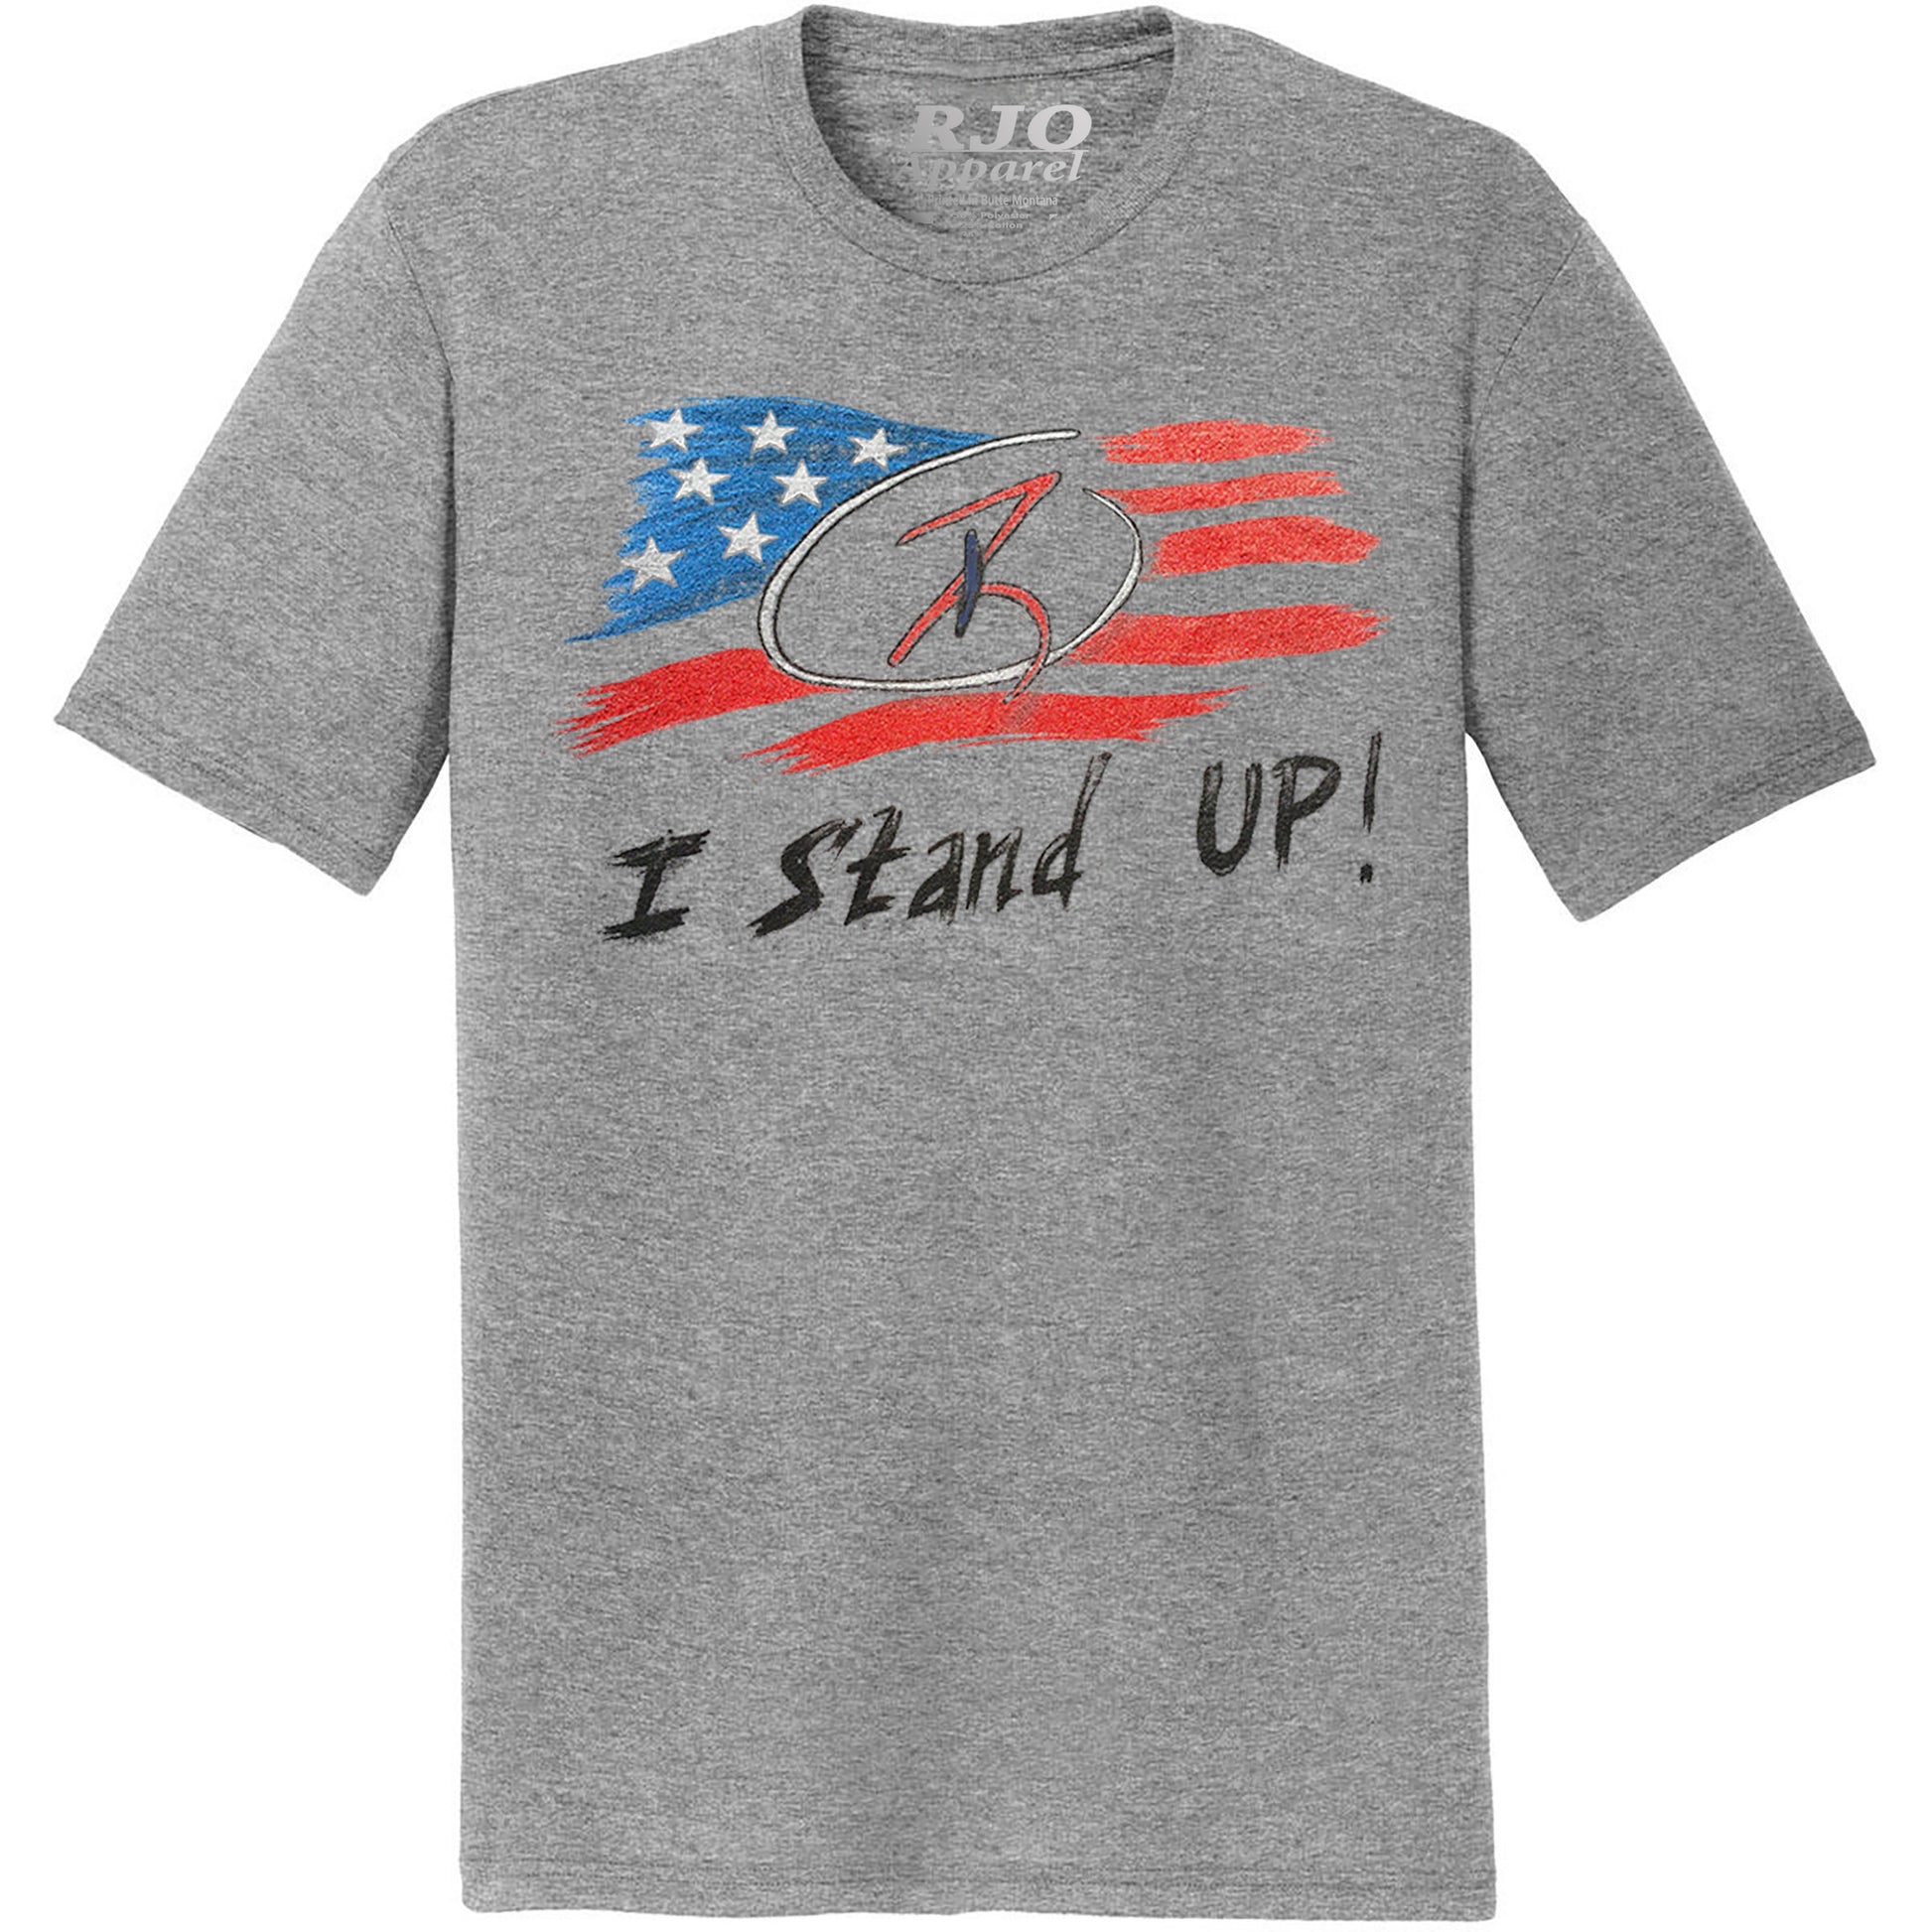 I stand up printed American flag gray men's tee RJO